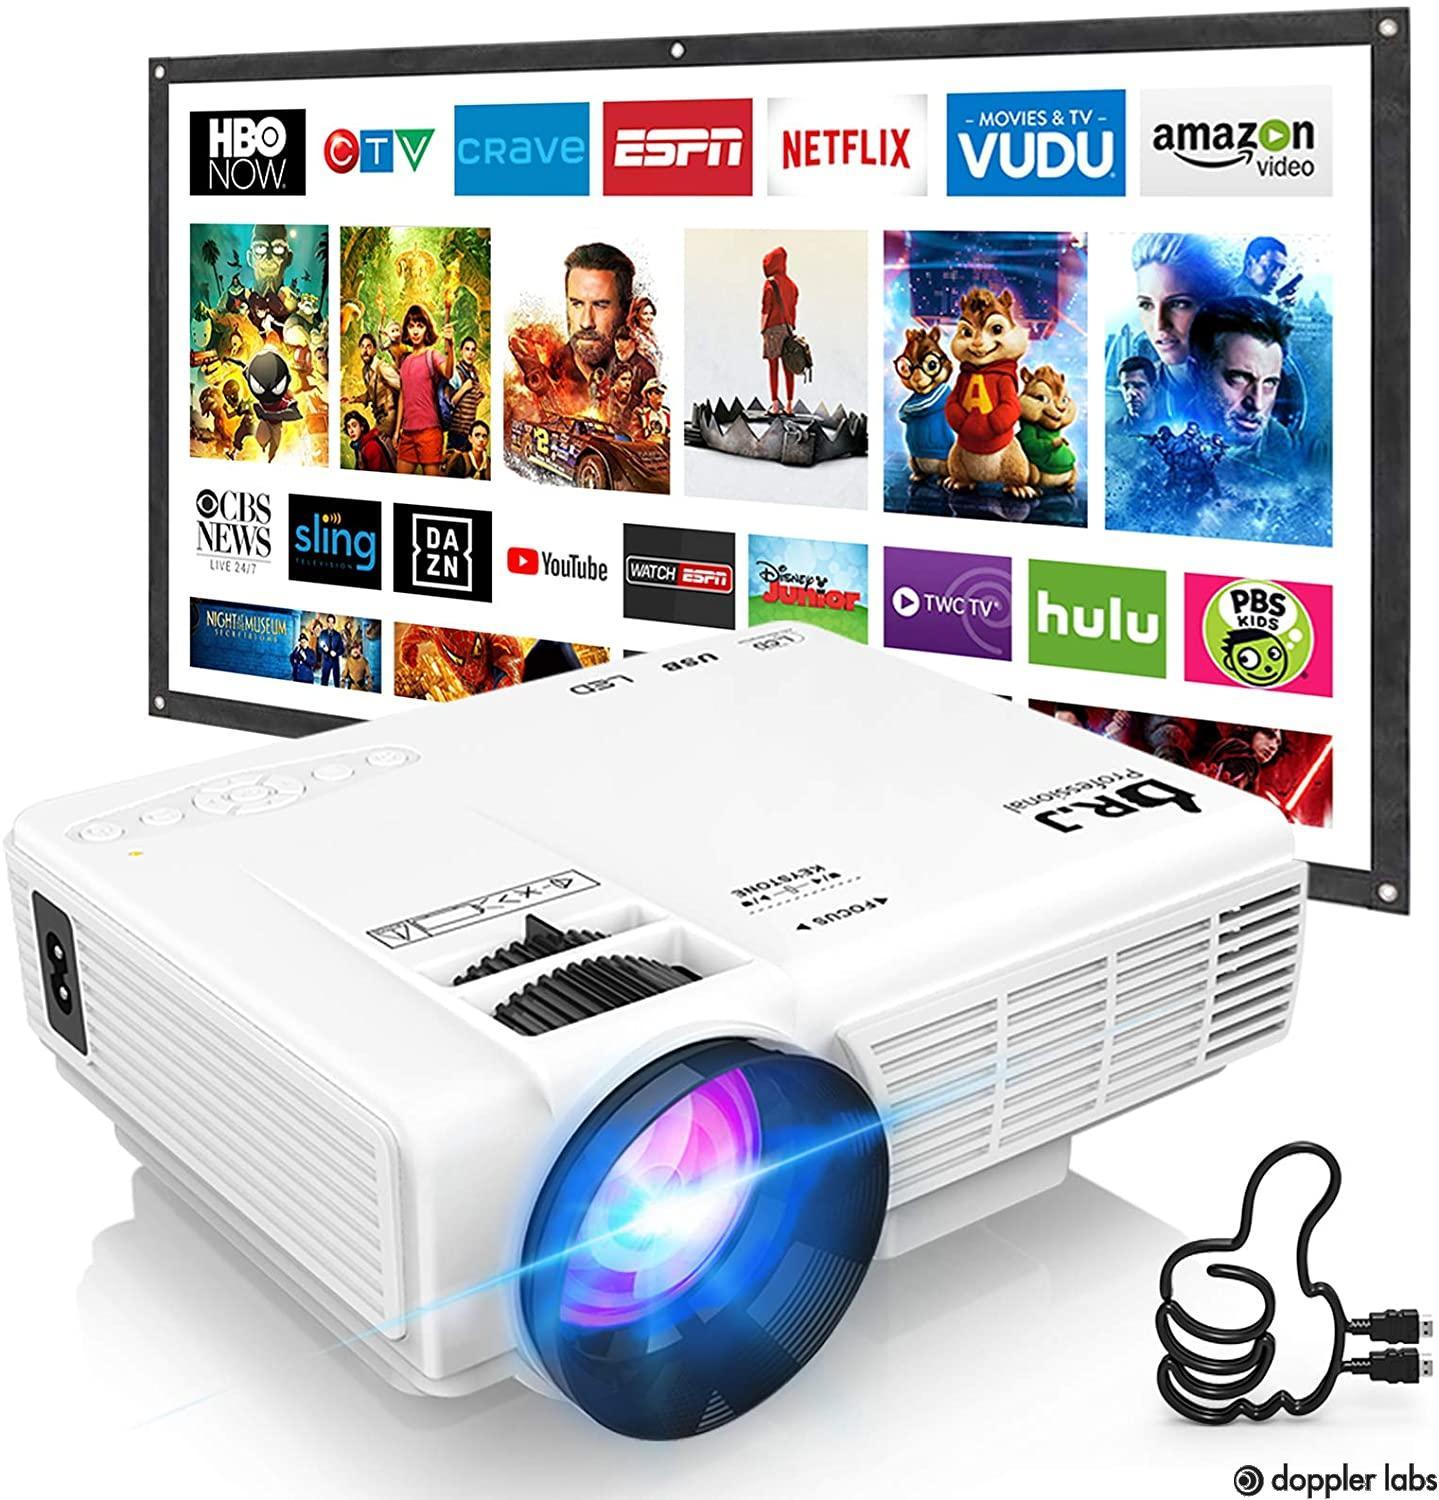 VGA HDMI Crenova Upgraded iPad Video Projector iPhone LED Portable Projector with Carrying Box 1080P Supported HD Home Projector USB +80% Lumens Compatible with Fire TV Stick TF 